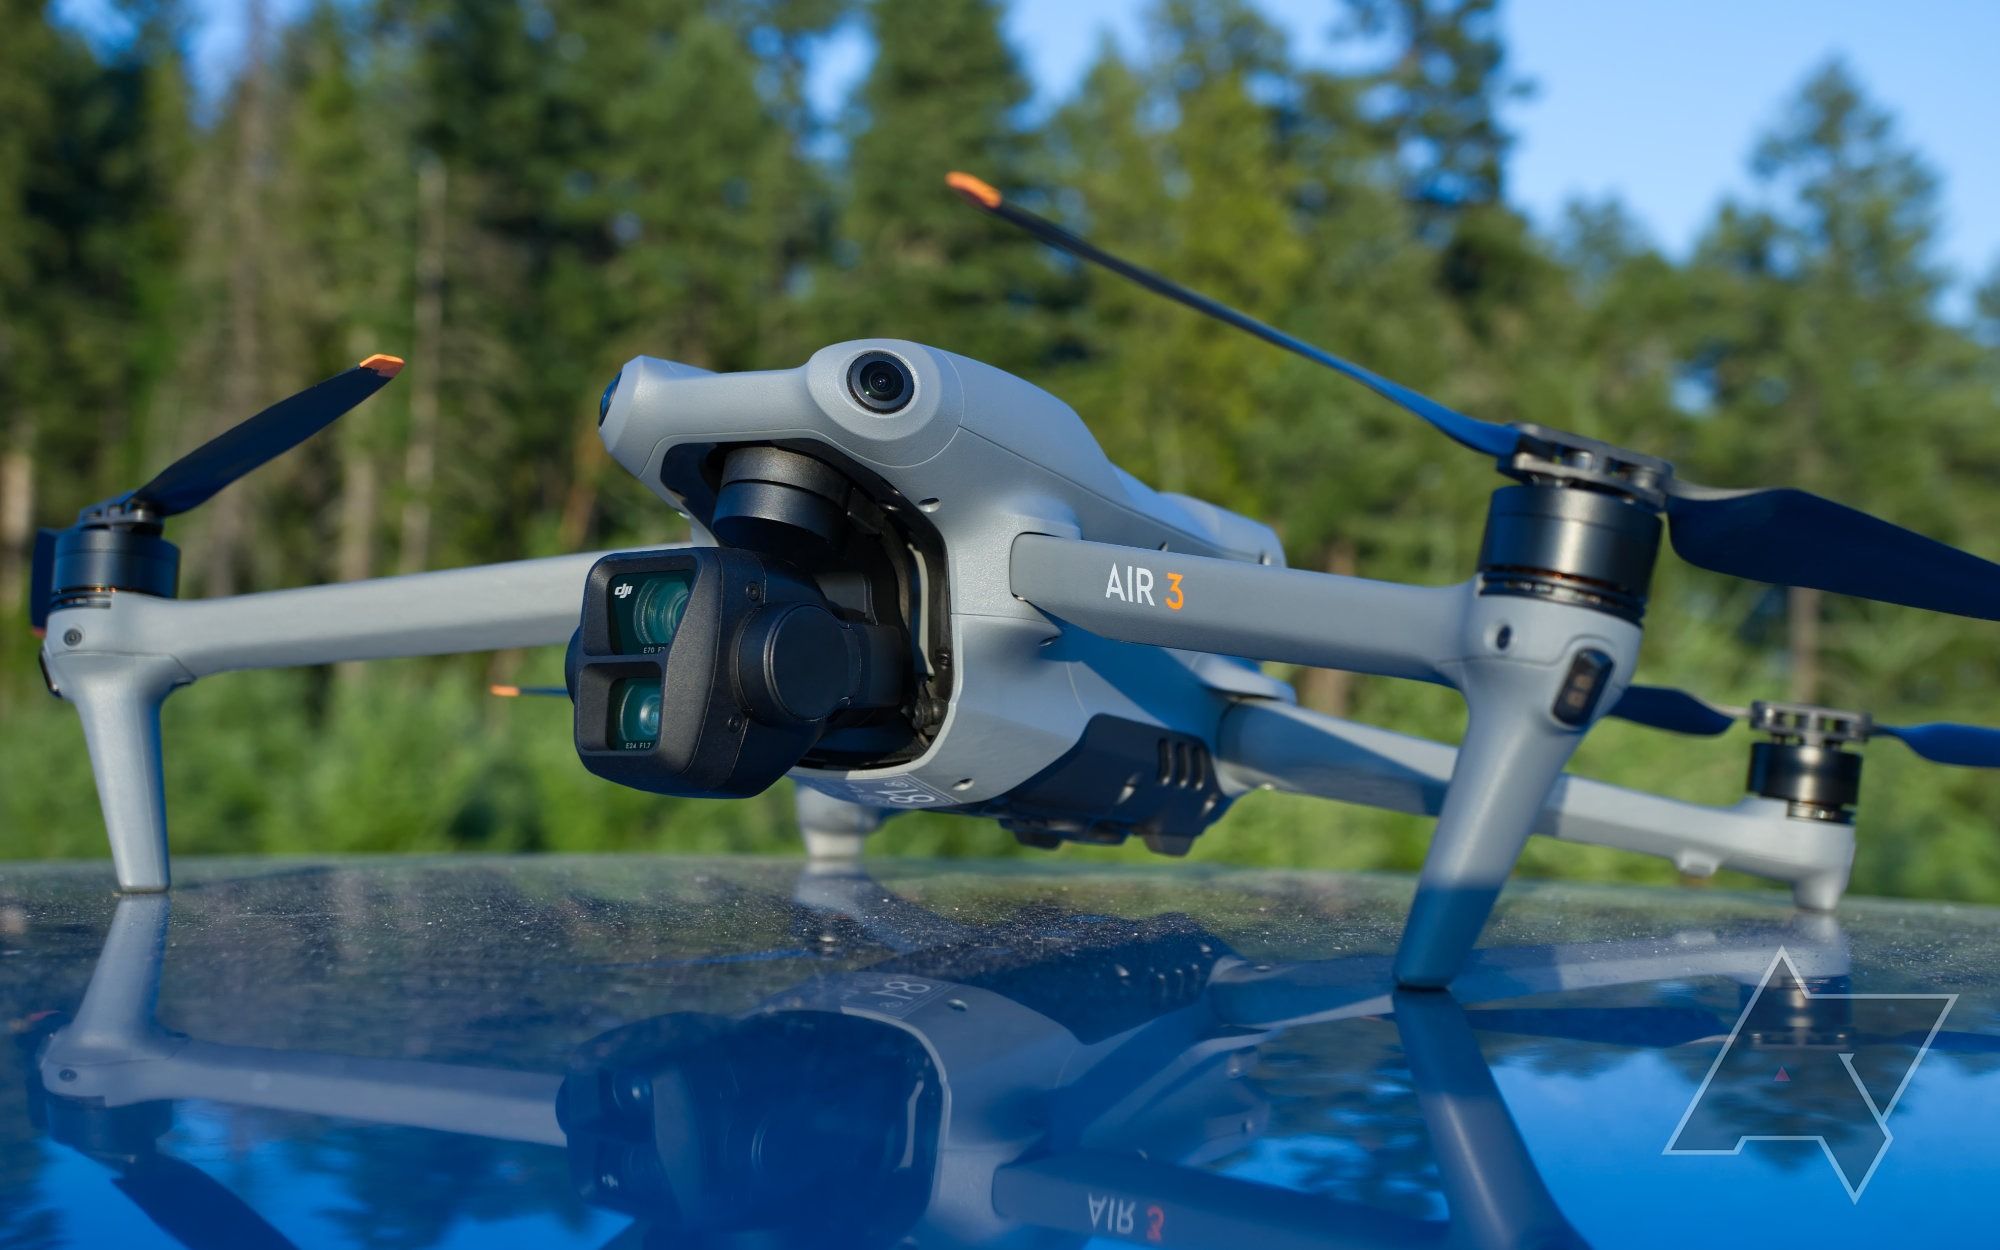 DJI Air 3 review: Jack of all trades, master of one